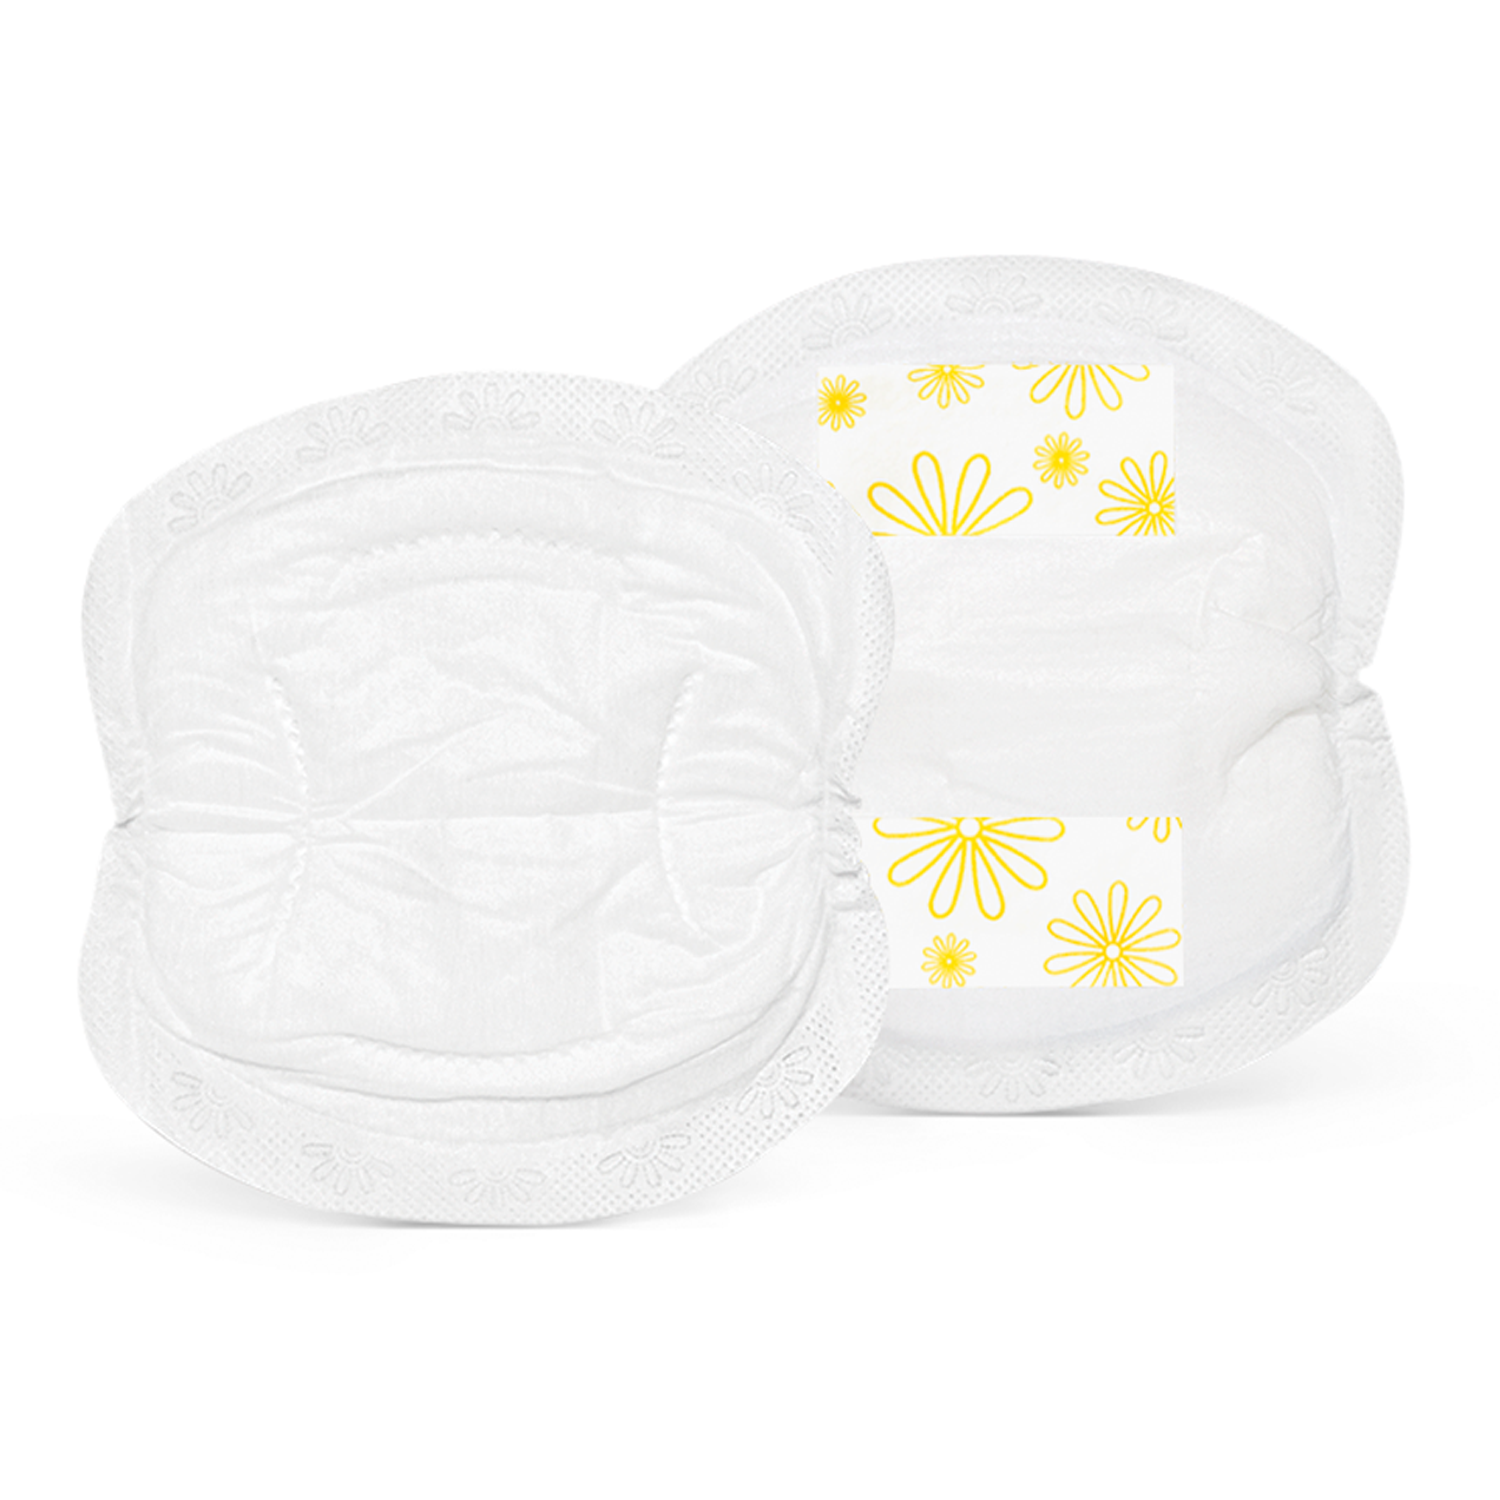 https://nellyboo.co.nz/cdn/shop/products/medela-disposable-bra-pads-837574_1500x.png?v=1635993637